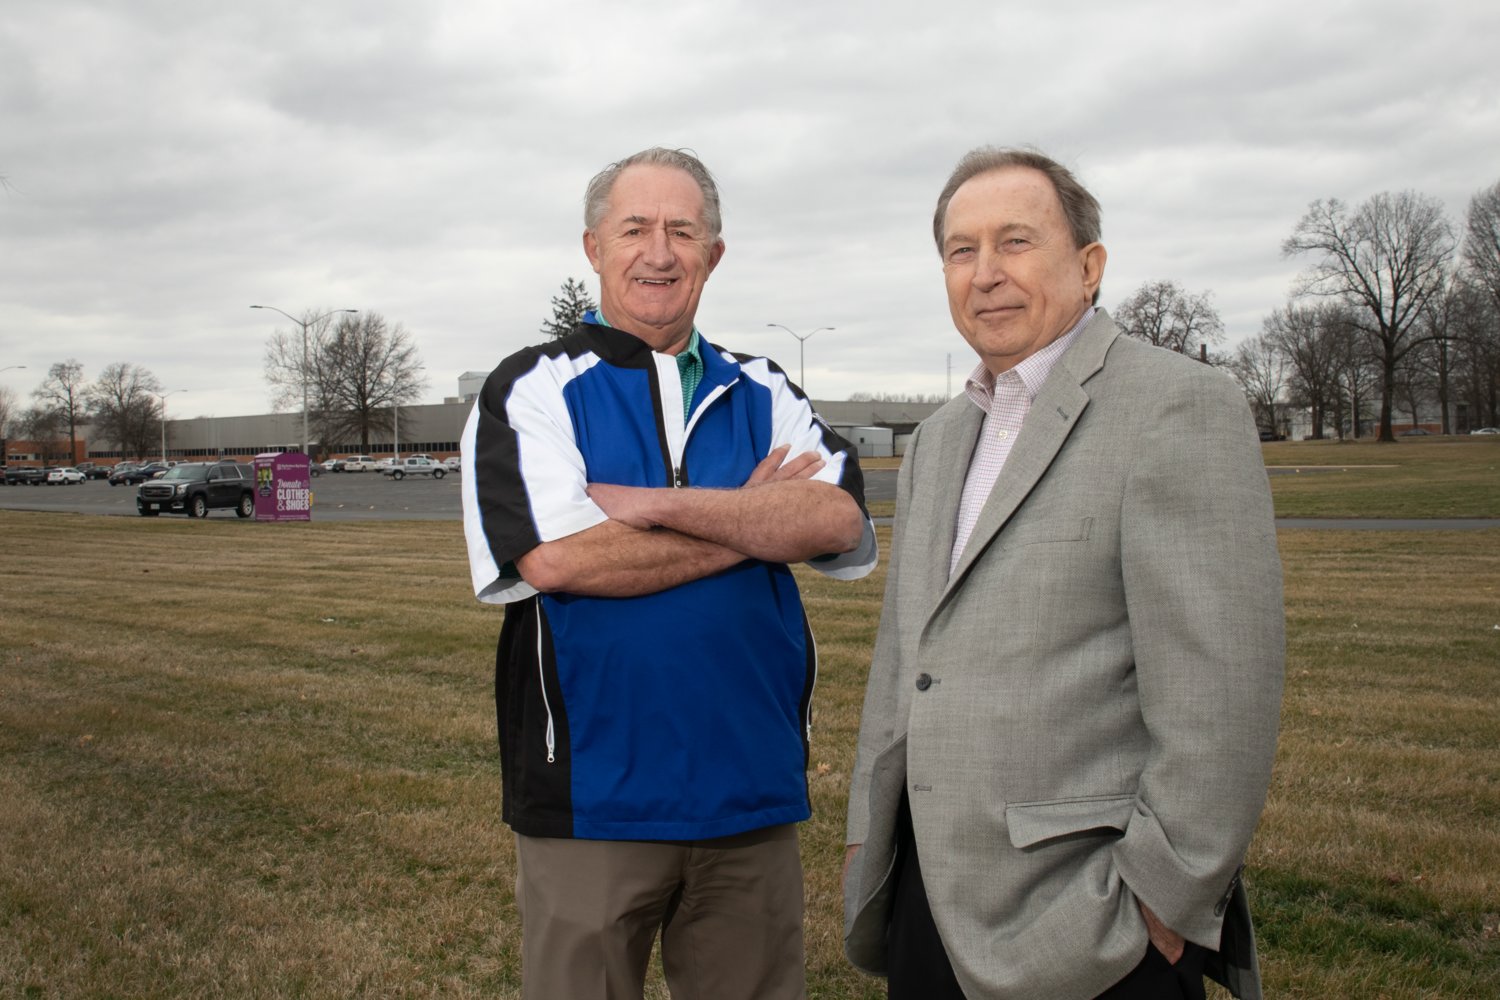 Dick Moger, left, and Dennis Sheppard of the newly formed SRC Realty say the company plans to build 70,000 square feet for office, retail and restaurant use on East Sunshine Street.